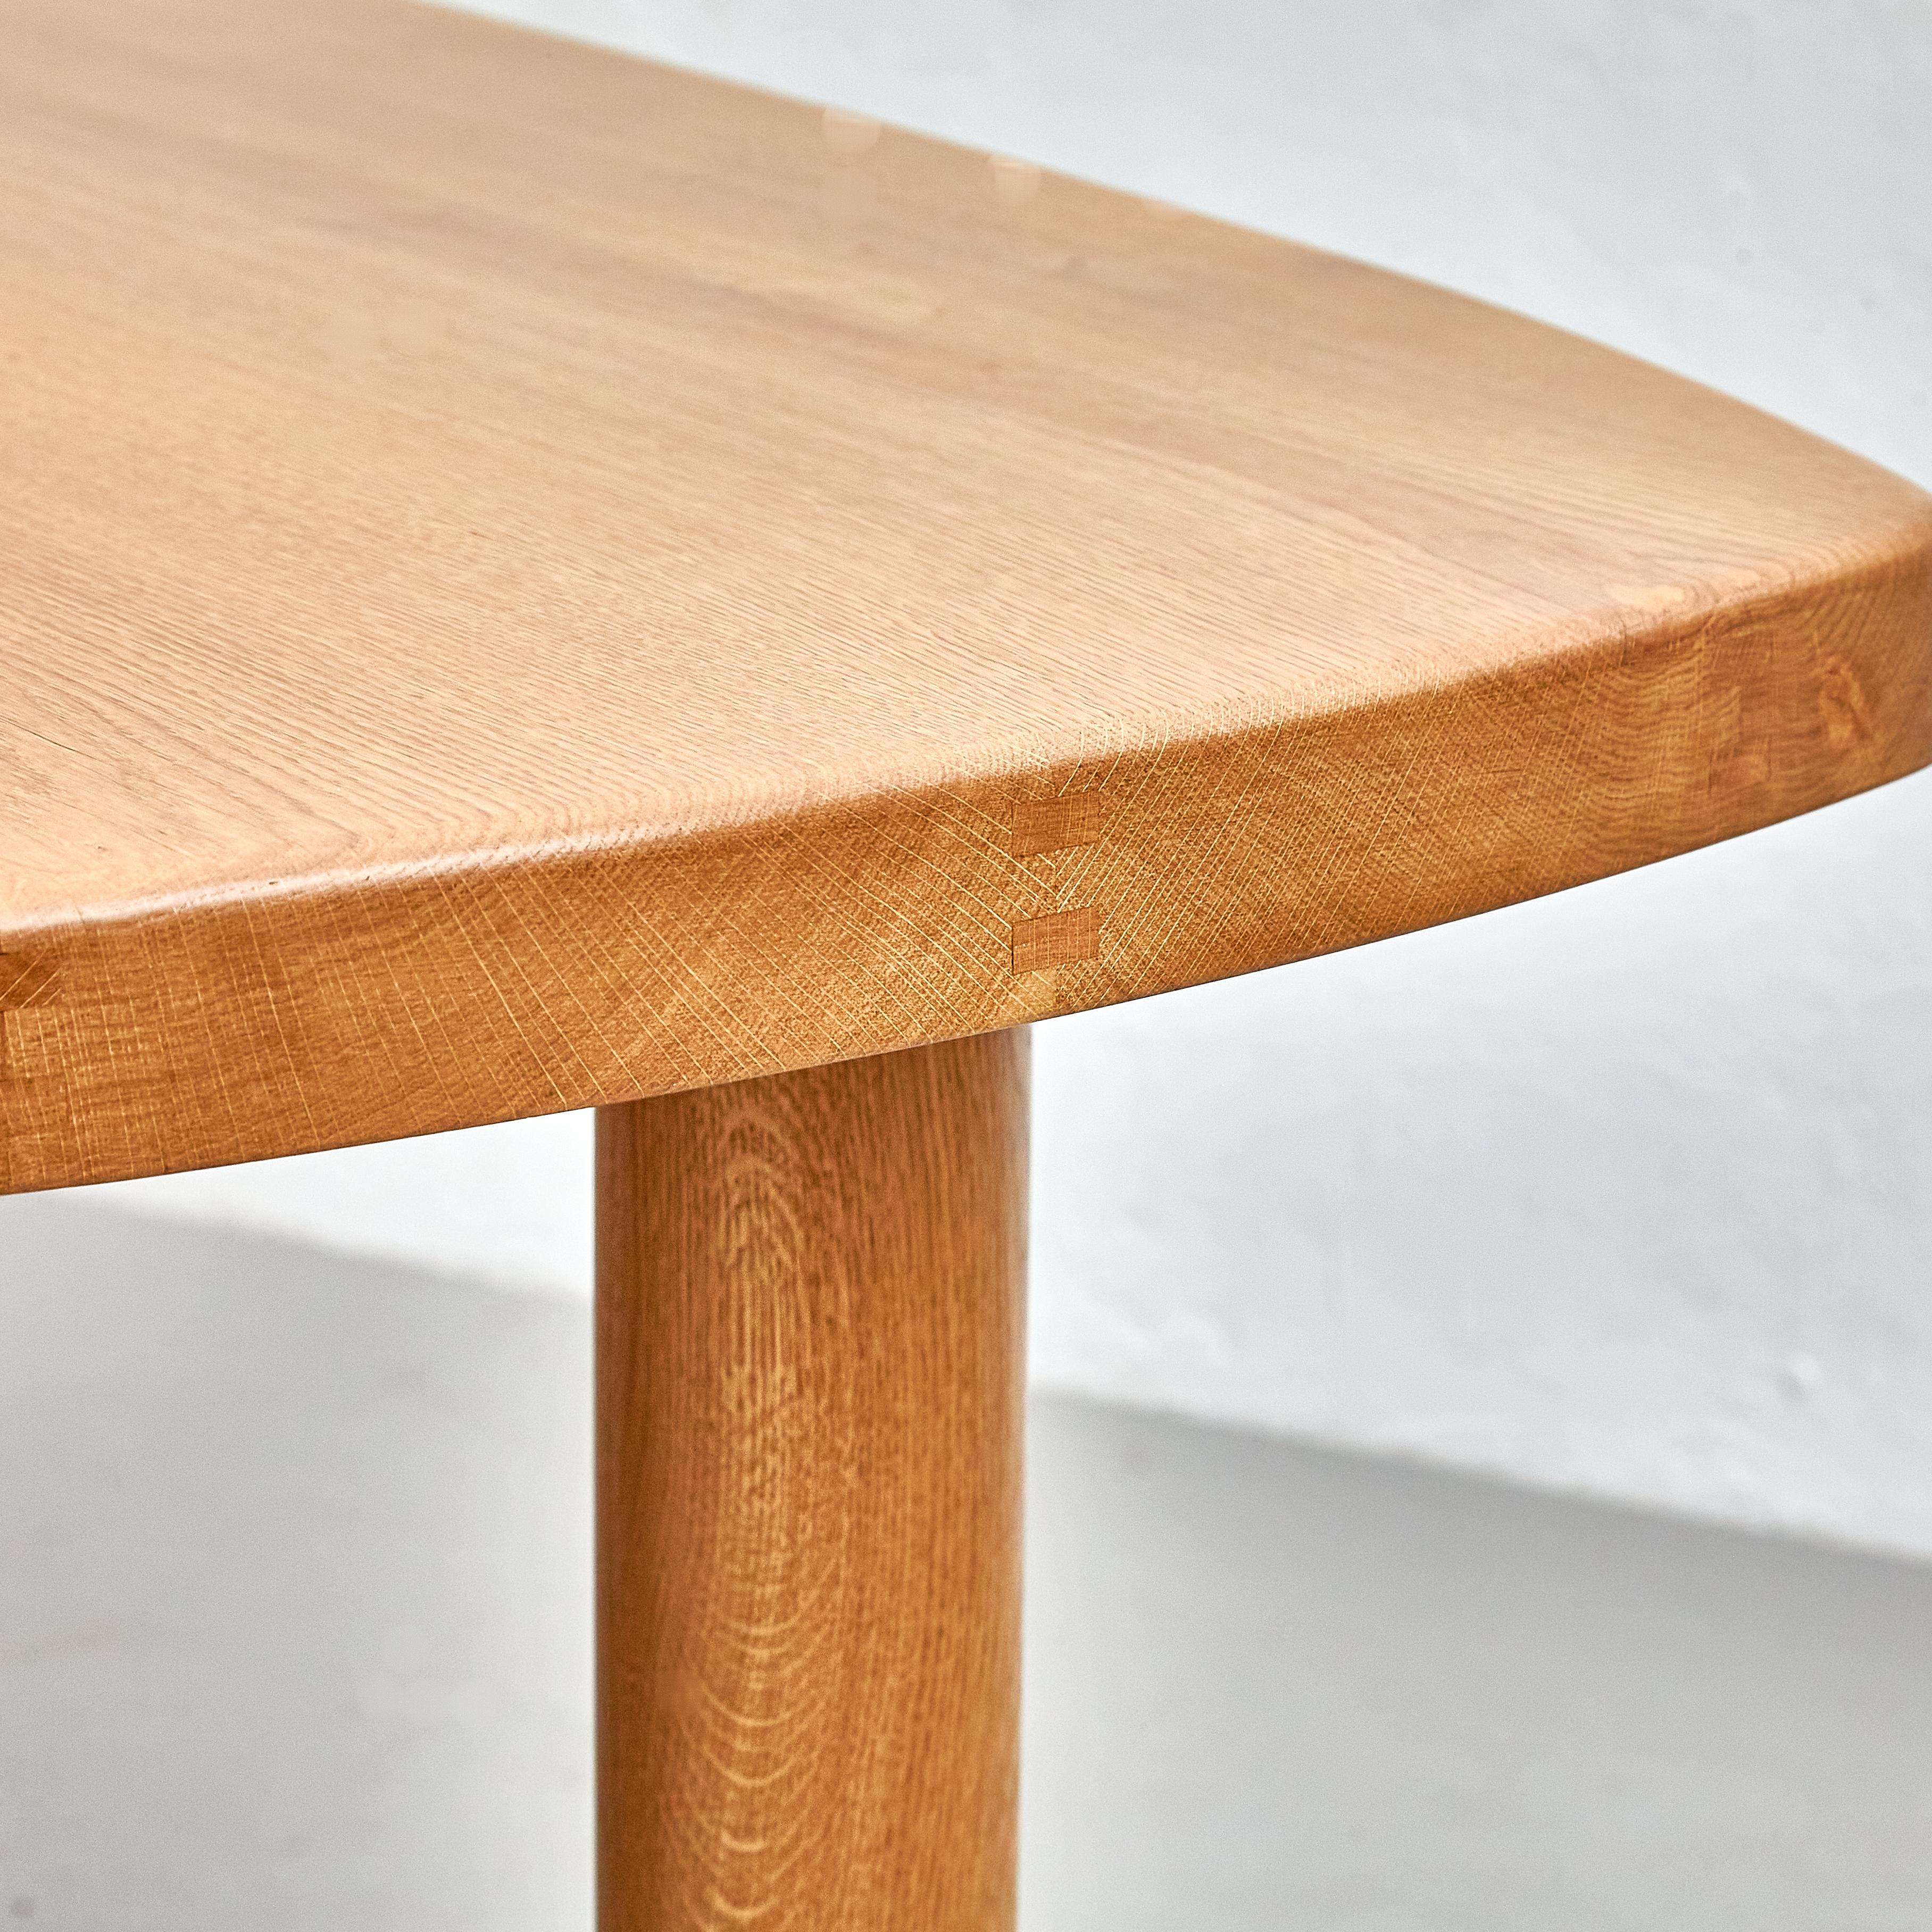 Contemporary Dada Est. Oak Table - Artisan Crafted with Midcentury Design Charm For Sale 4